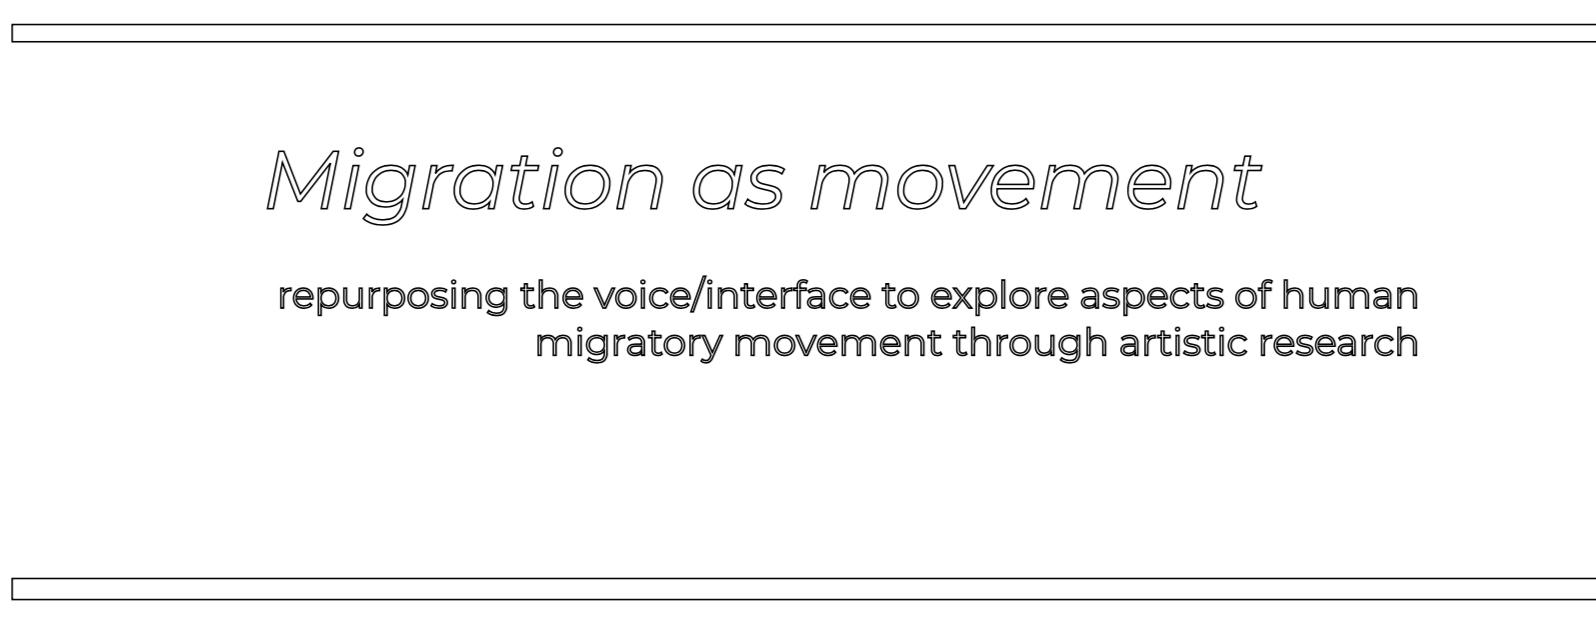 Migration as movement
   - repurposing the voice/interface to explore aspects of human migratory
    movement through artistic reserach